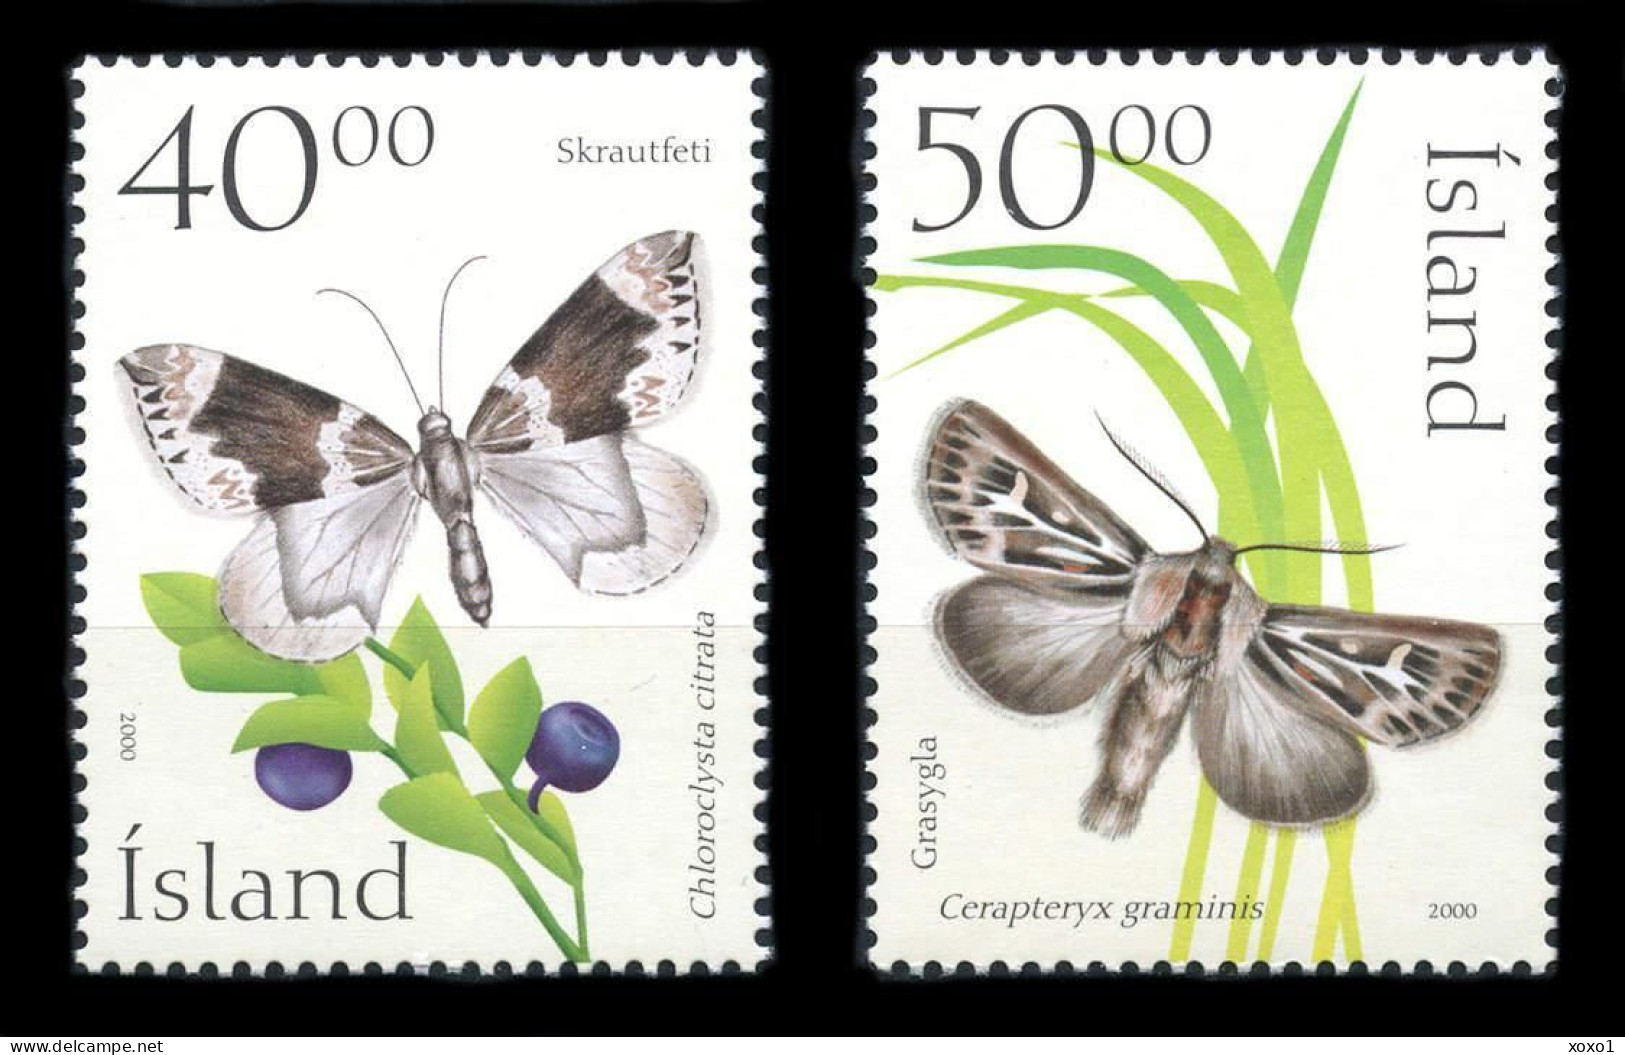 Iceland 2000 MiNr. 963 - 964 Island  Insects, Butterflies  2v  MNH**  3.00 € - Papillons